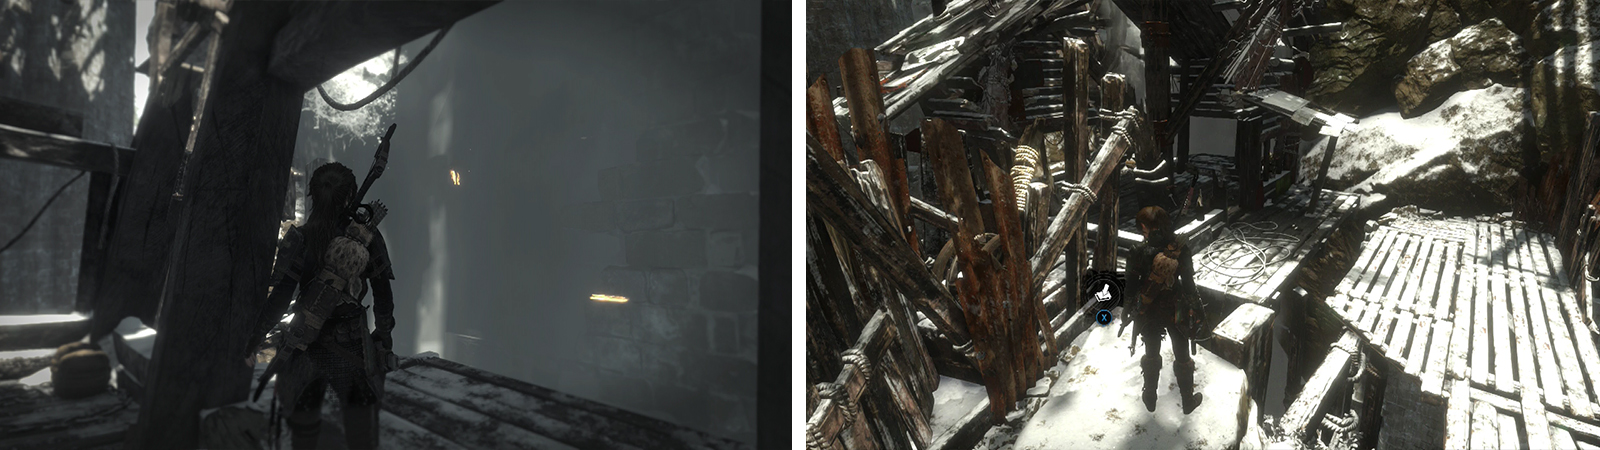 After riding the gondola, look behind the waterfall nearby for Document 13 (left) and on the nearby platform for Survival Cache 03 (right).